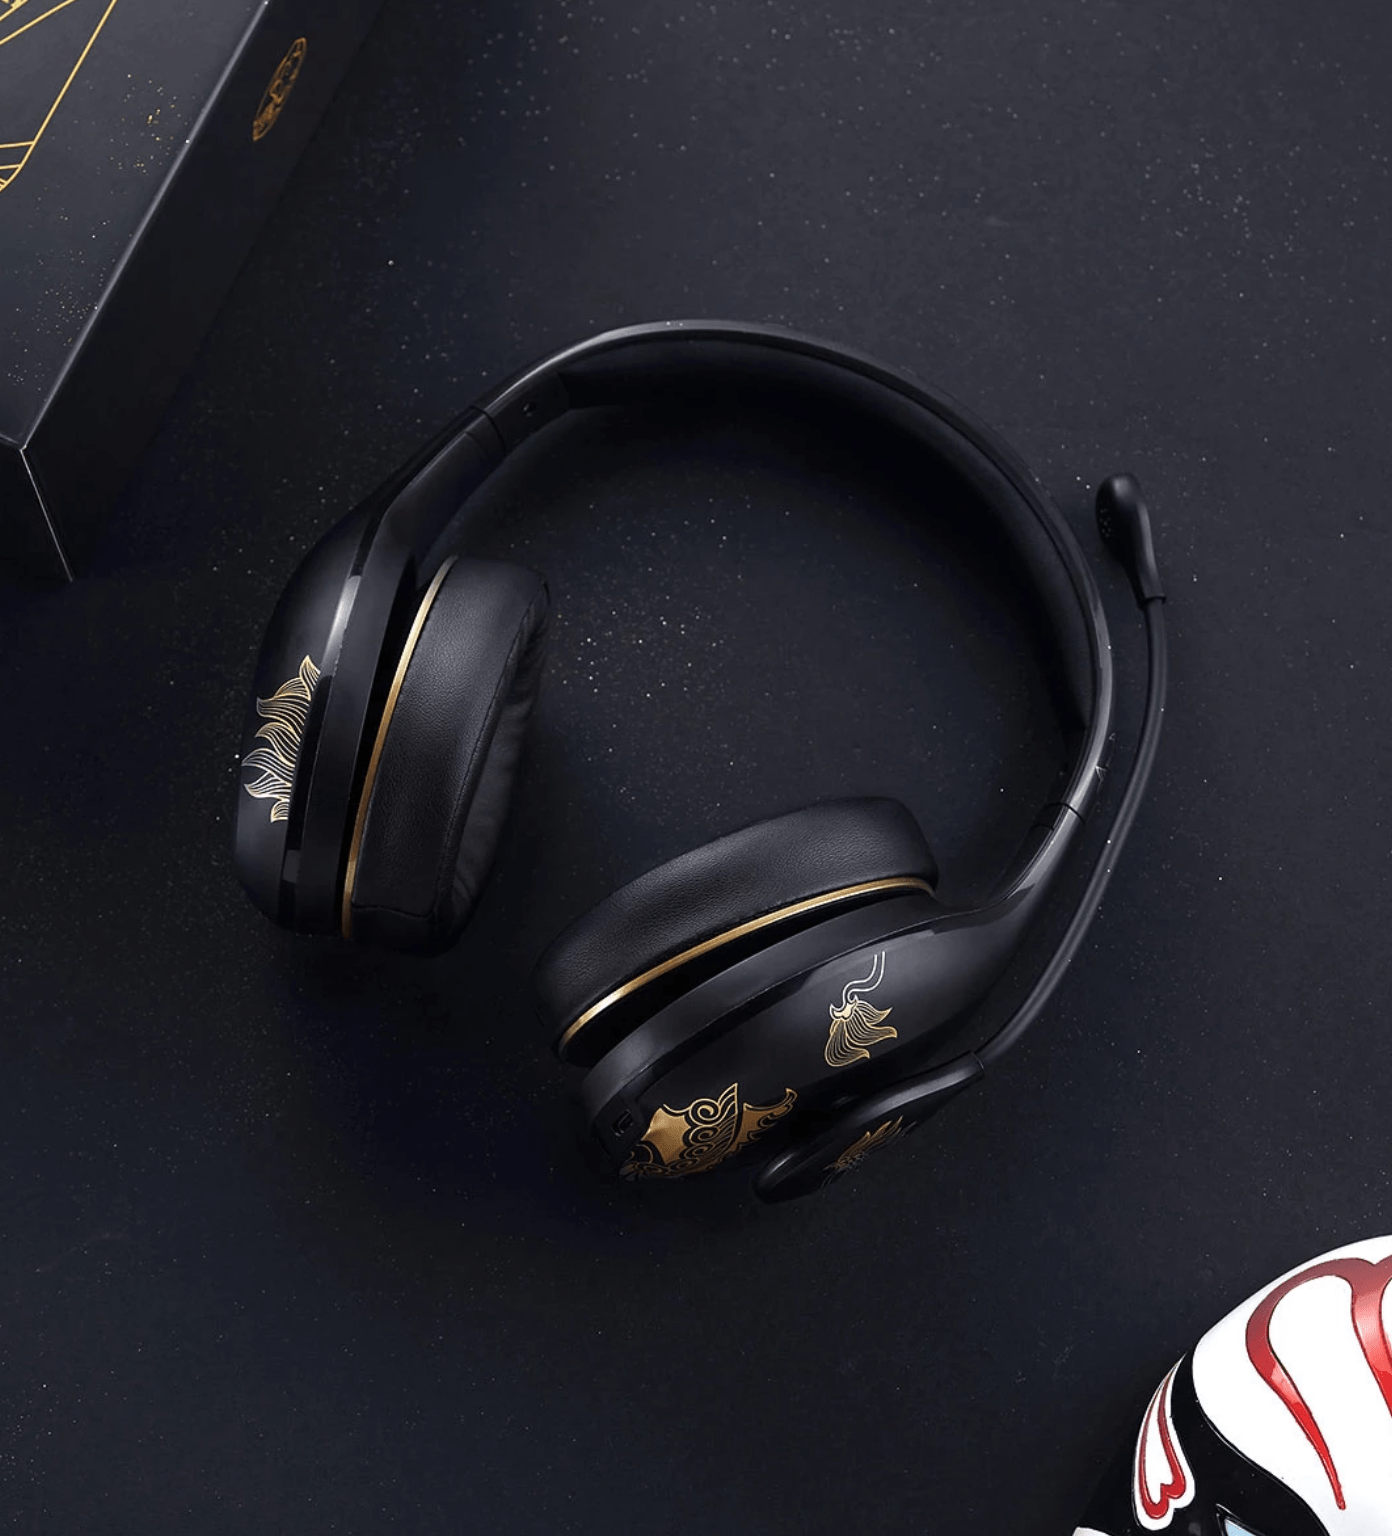 Limited edition of headphones with the same motif as the Mi Mix 3